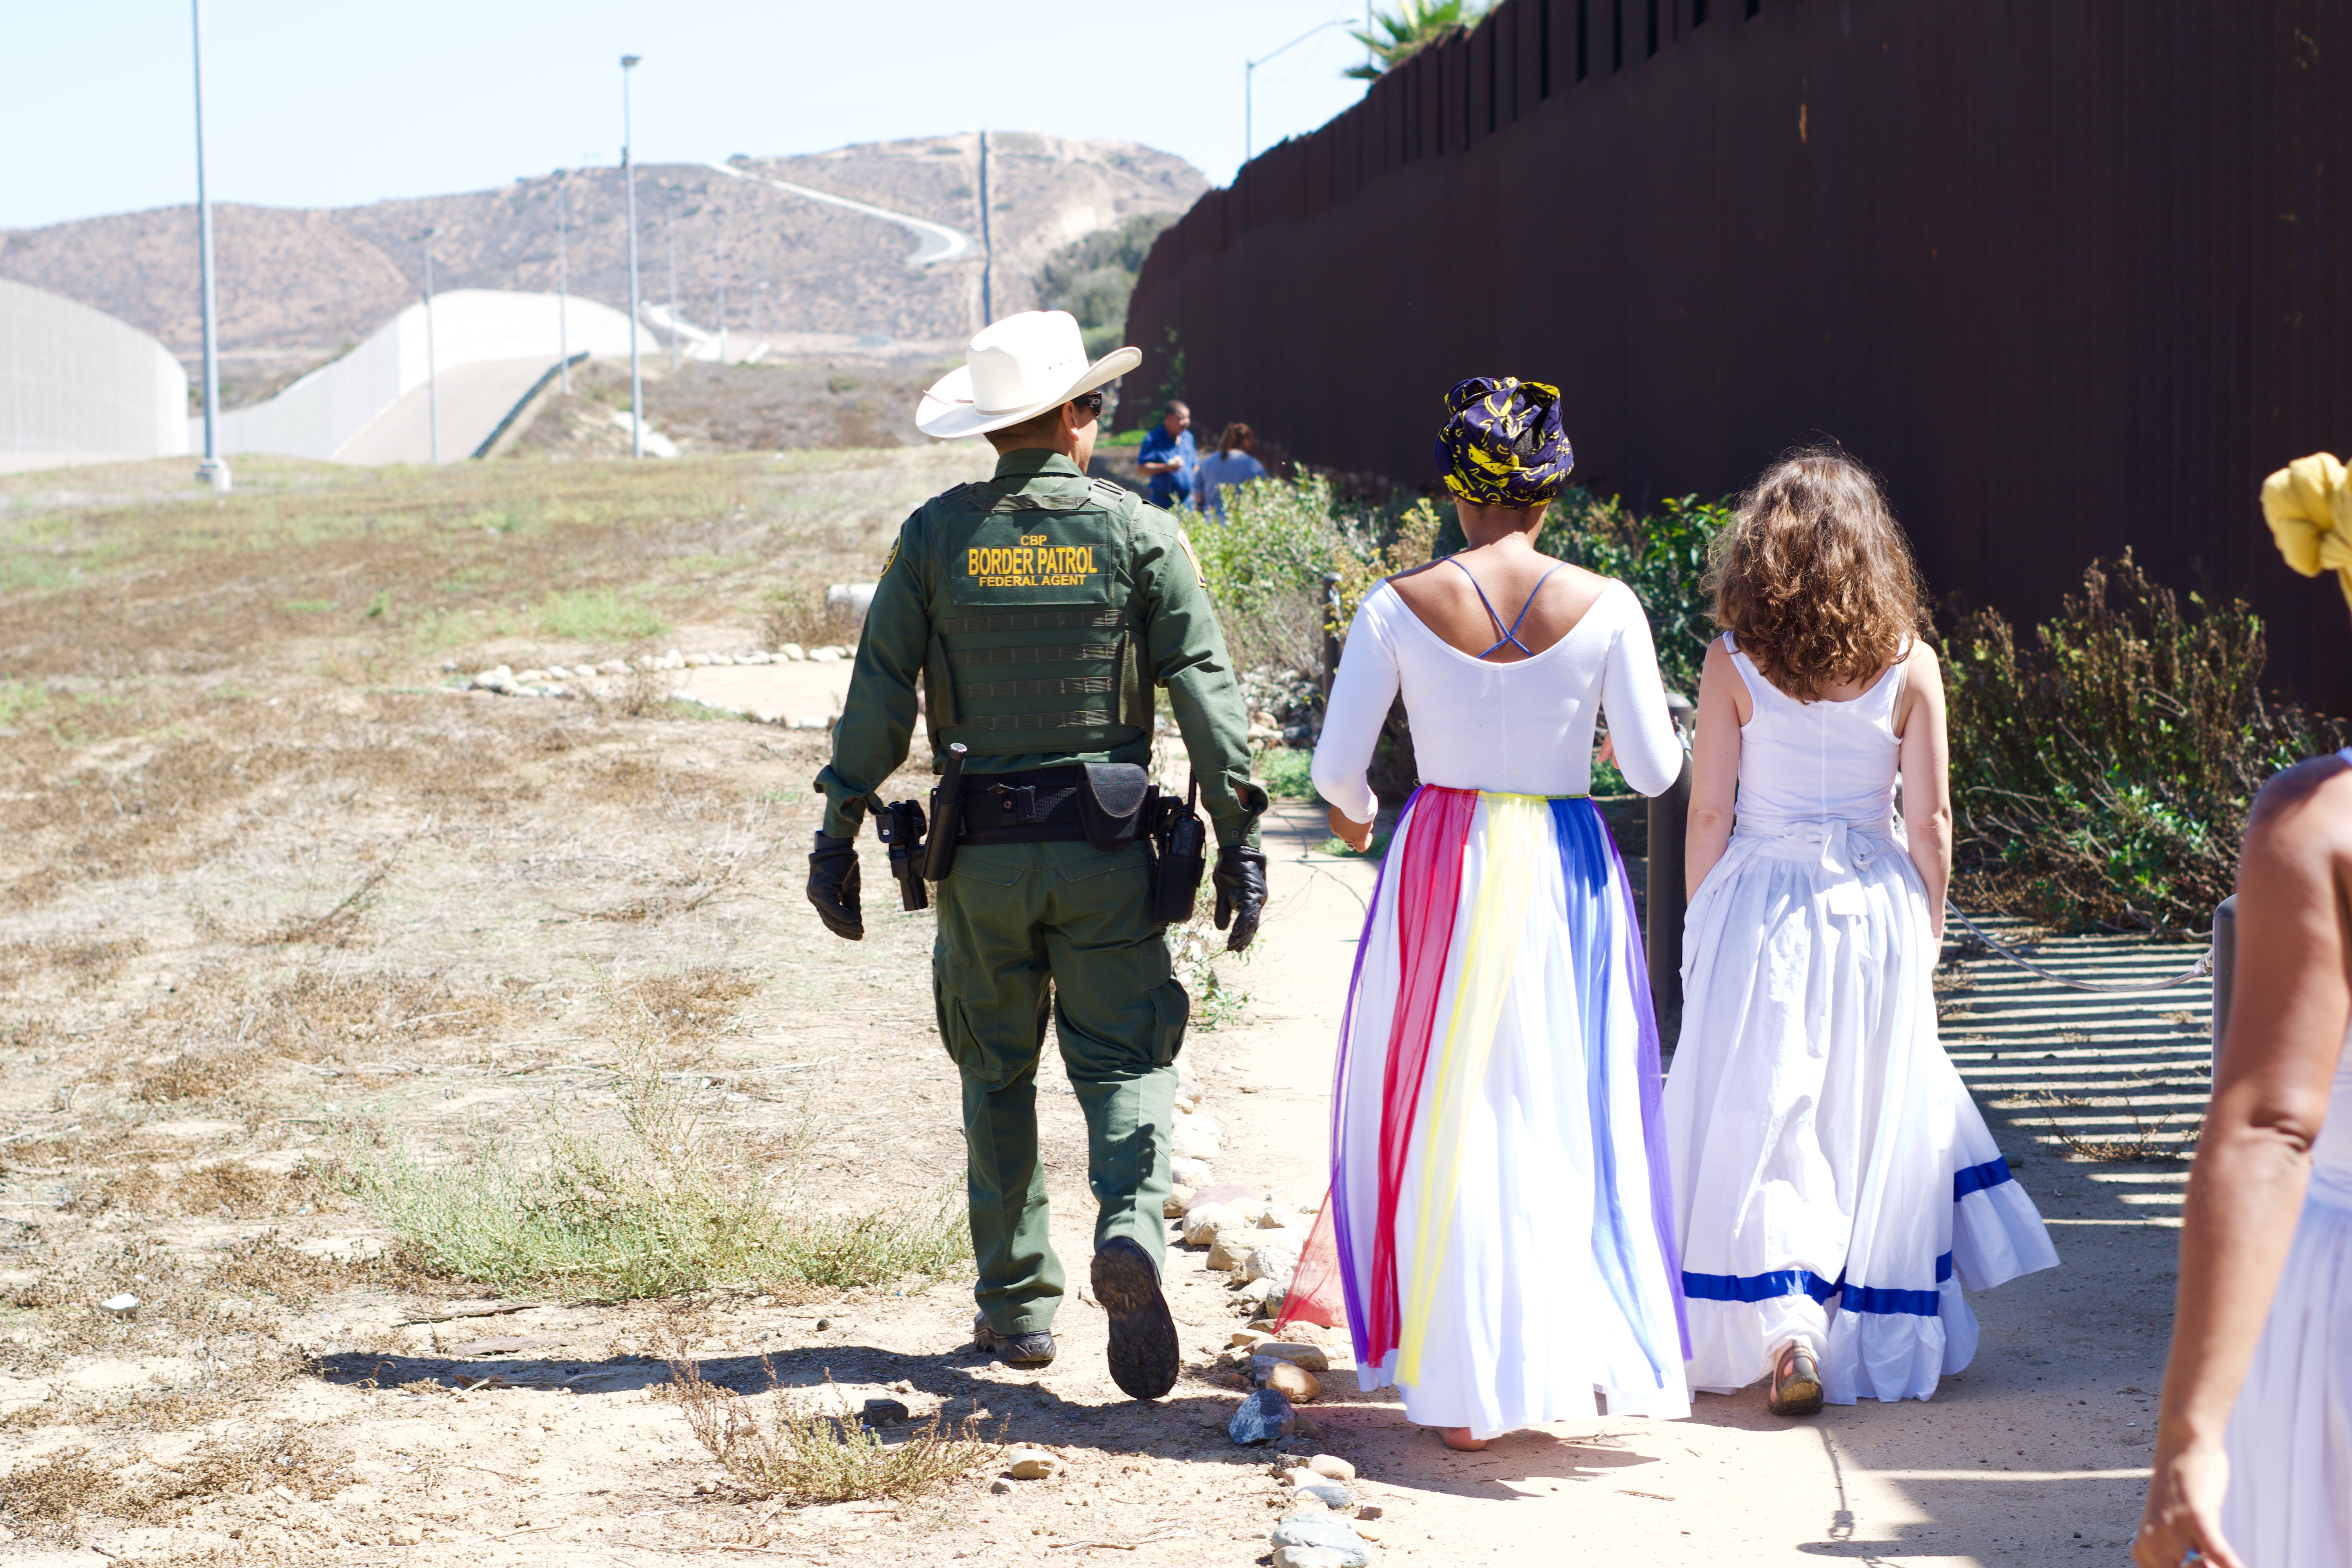 A border patrol agent walks next to a group of dancers at Friendship Park